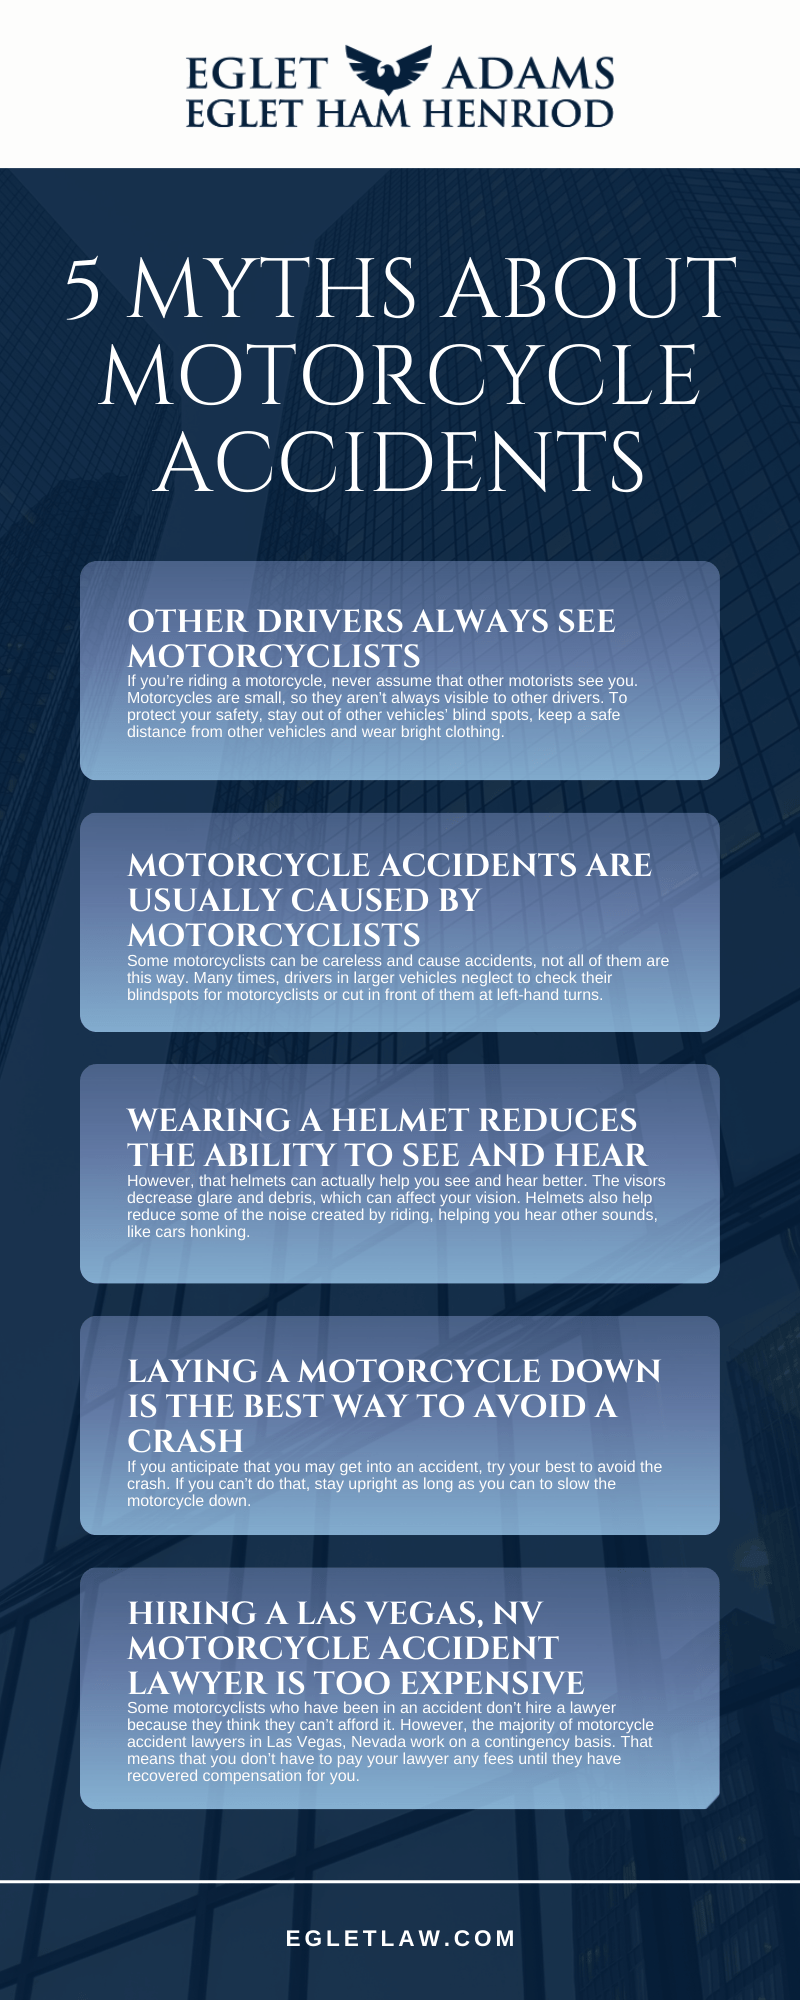 Five myths about motorcycle accidents Infographic